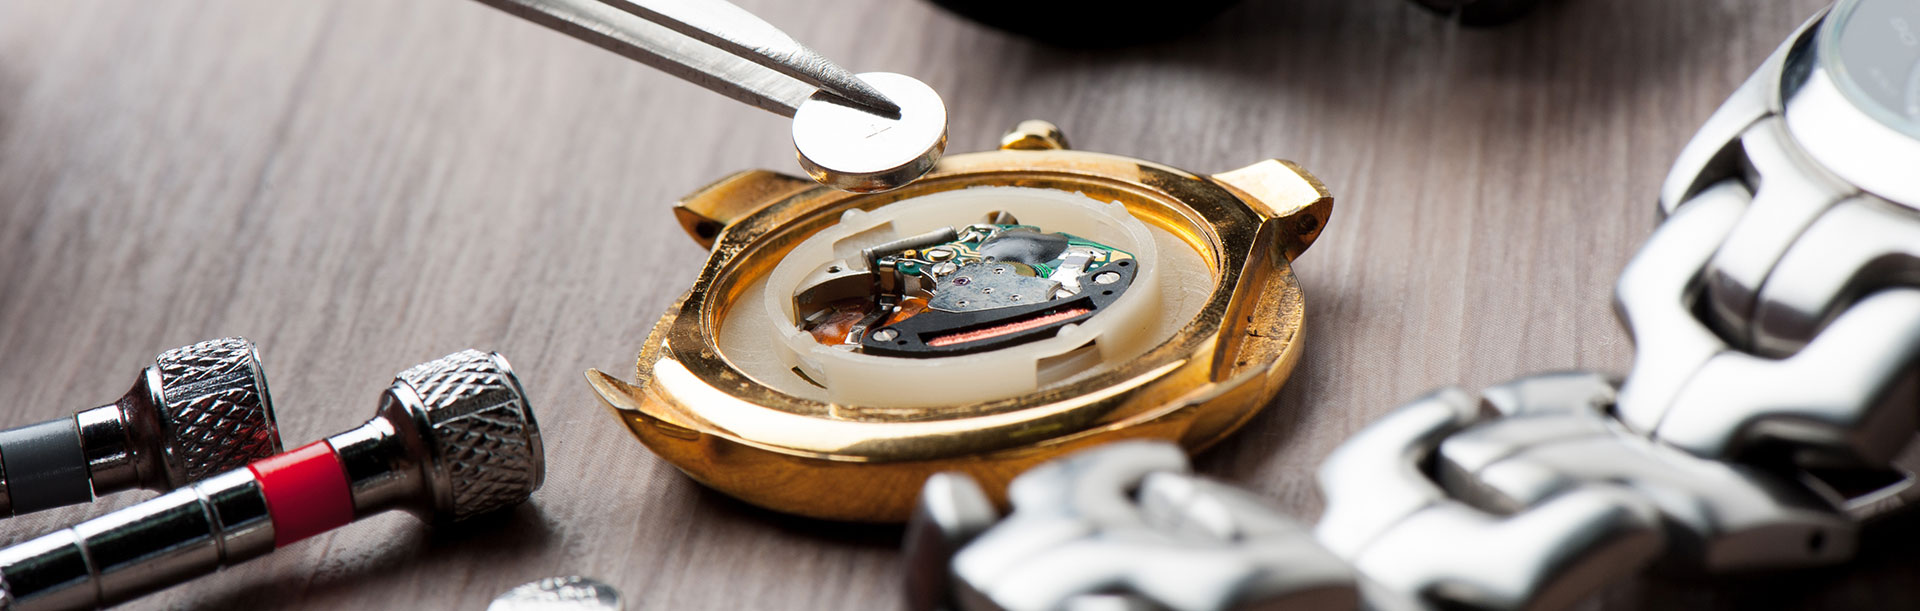 Does Your Watch Need to Be Serviced? (Everything You Need to Know)